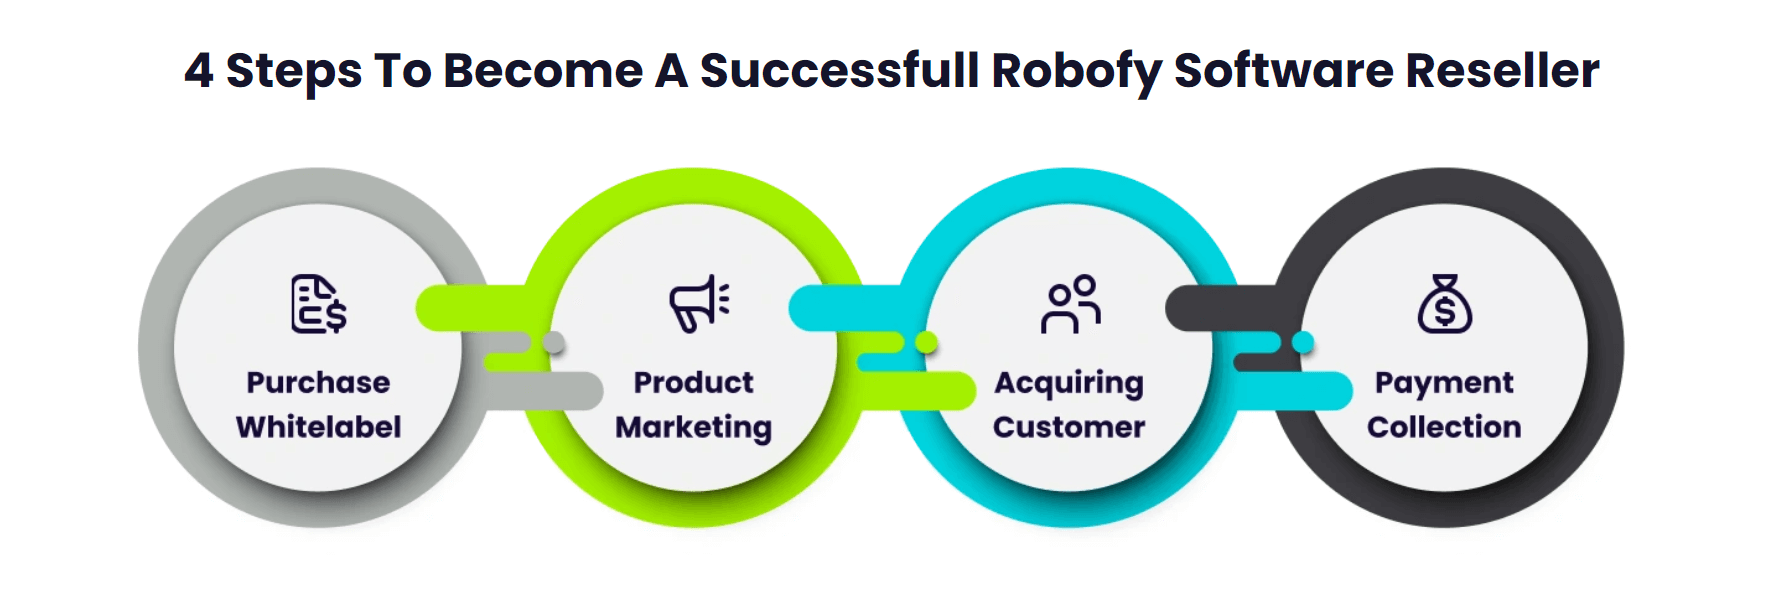 4 steps to become a successfull robofy